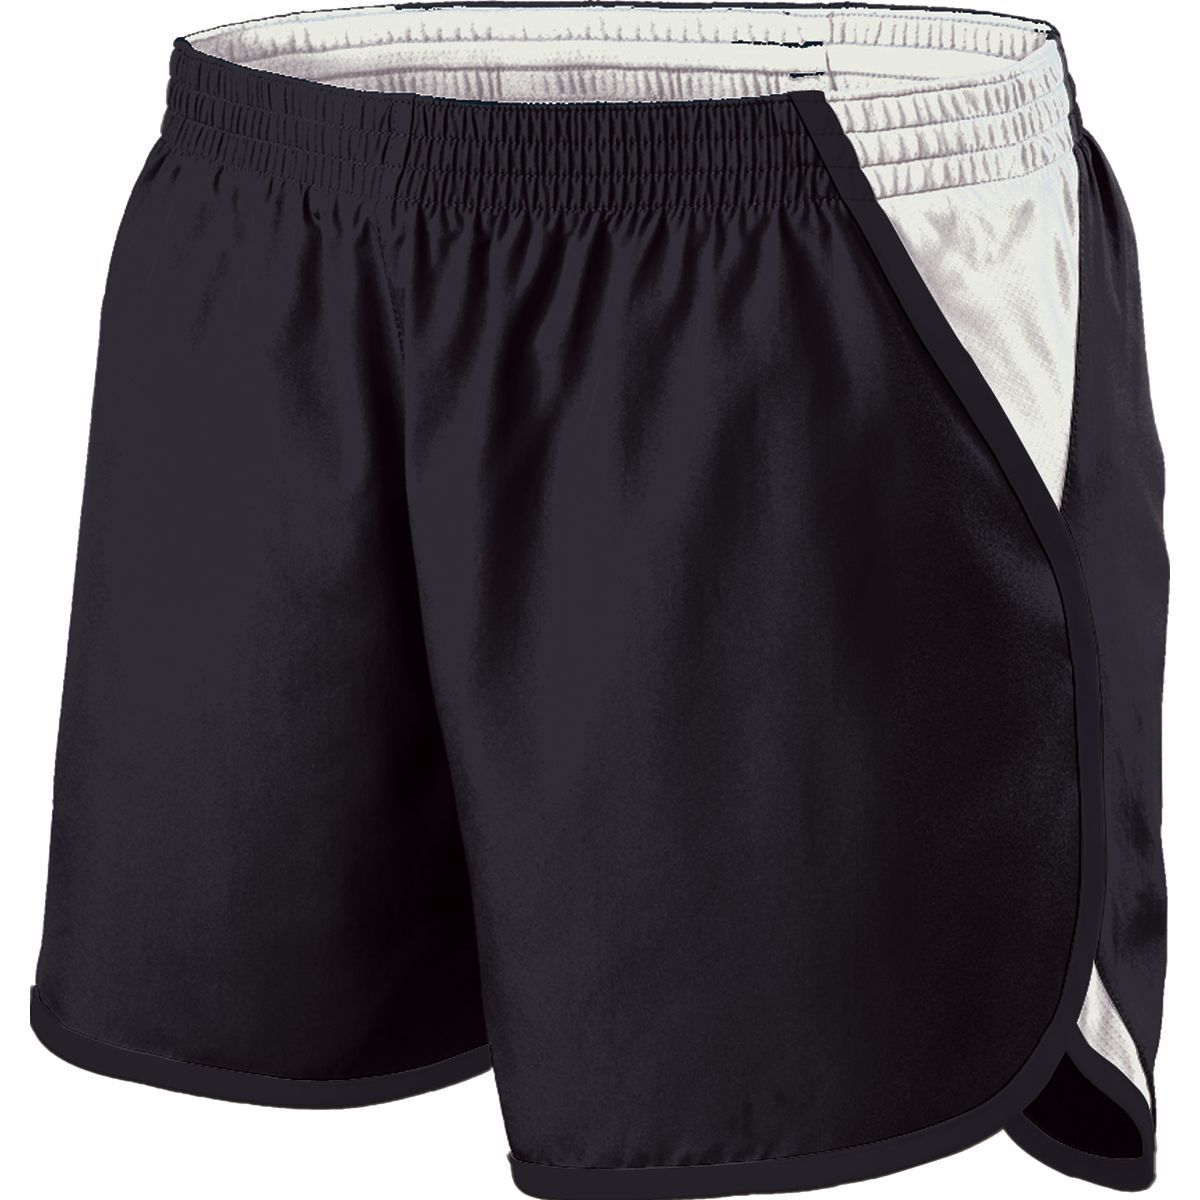 Holloway Energize Shorts in Black/White/Black  -Part of the Ladies, Ladies-Shorts, Holloway product lines at KanaleyCreations.com